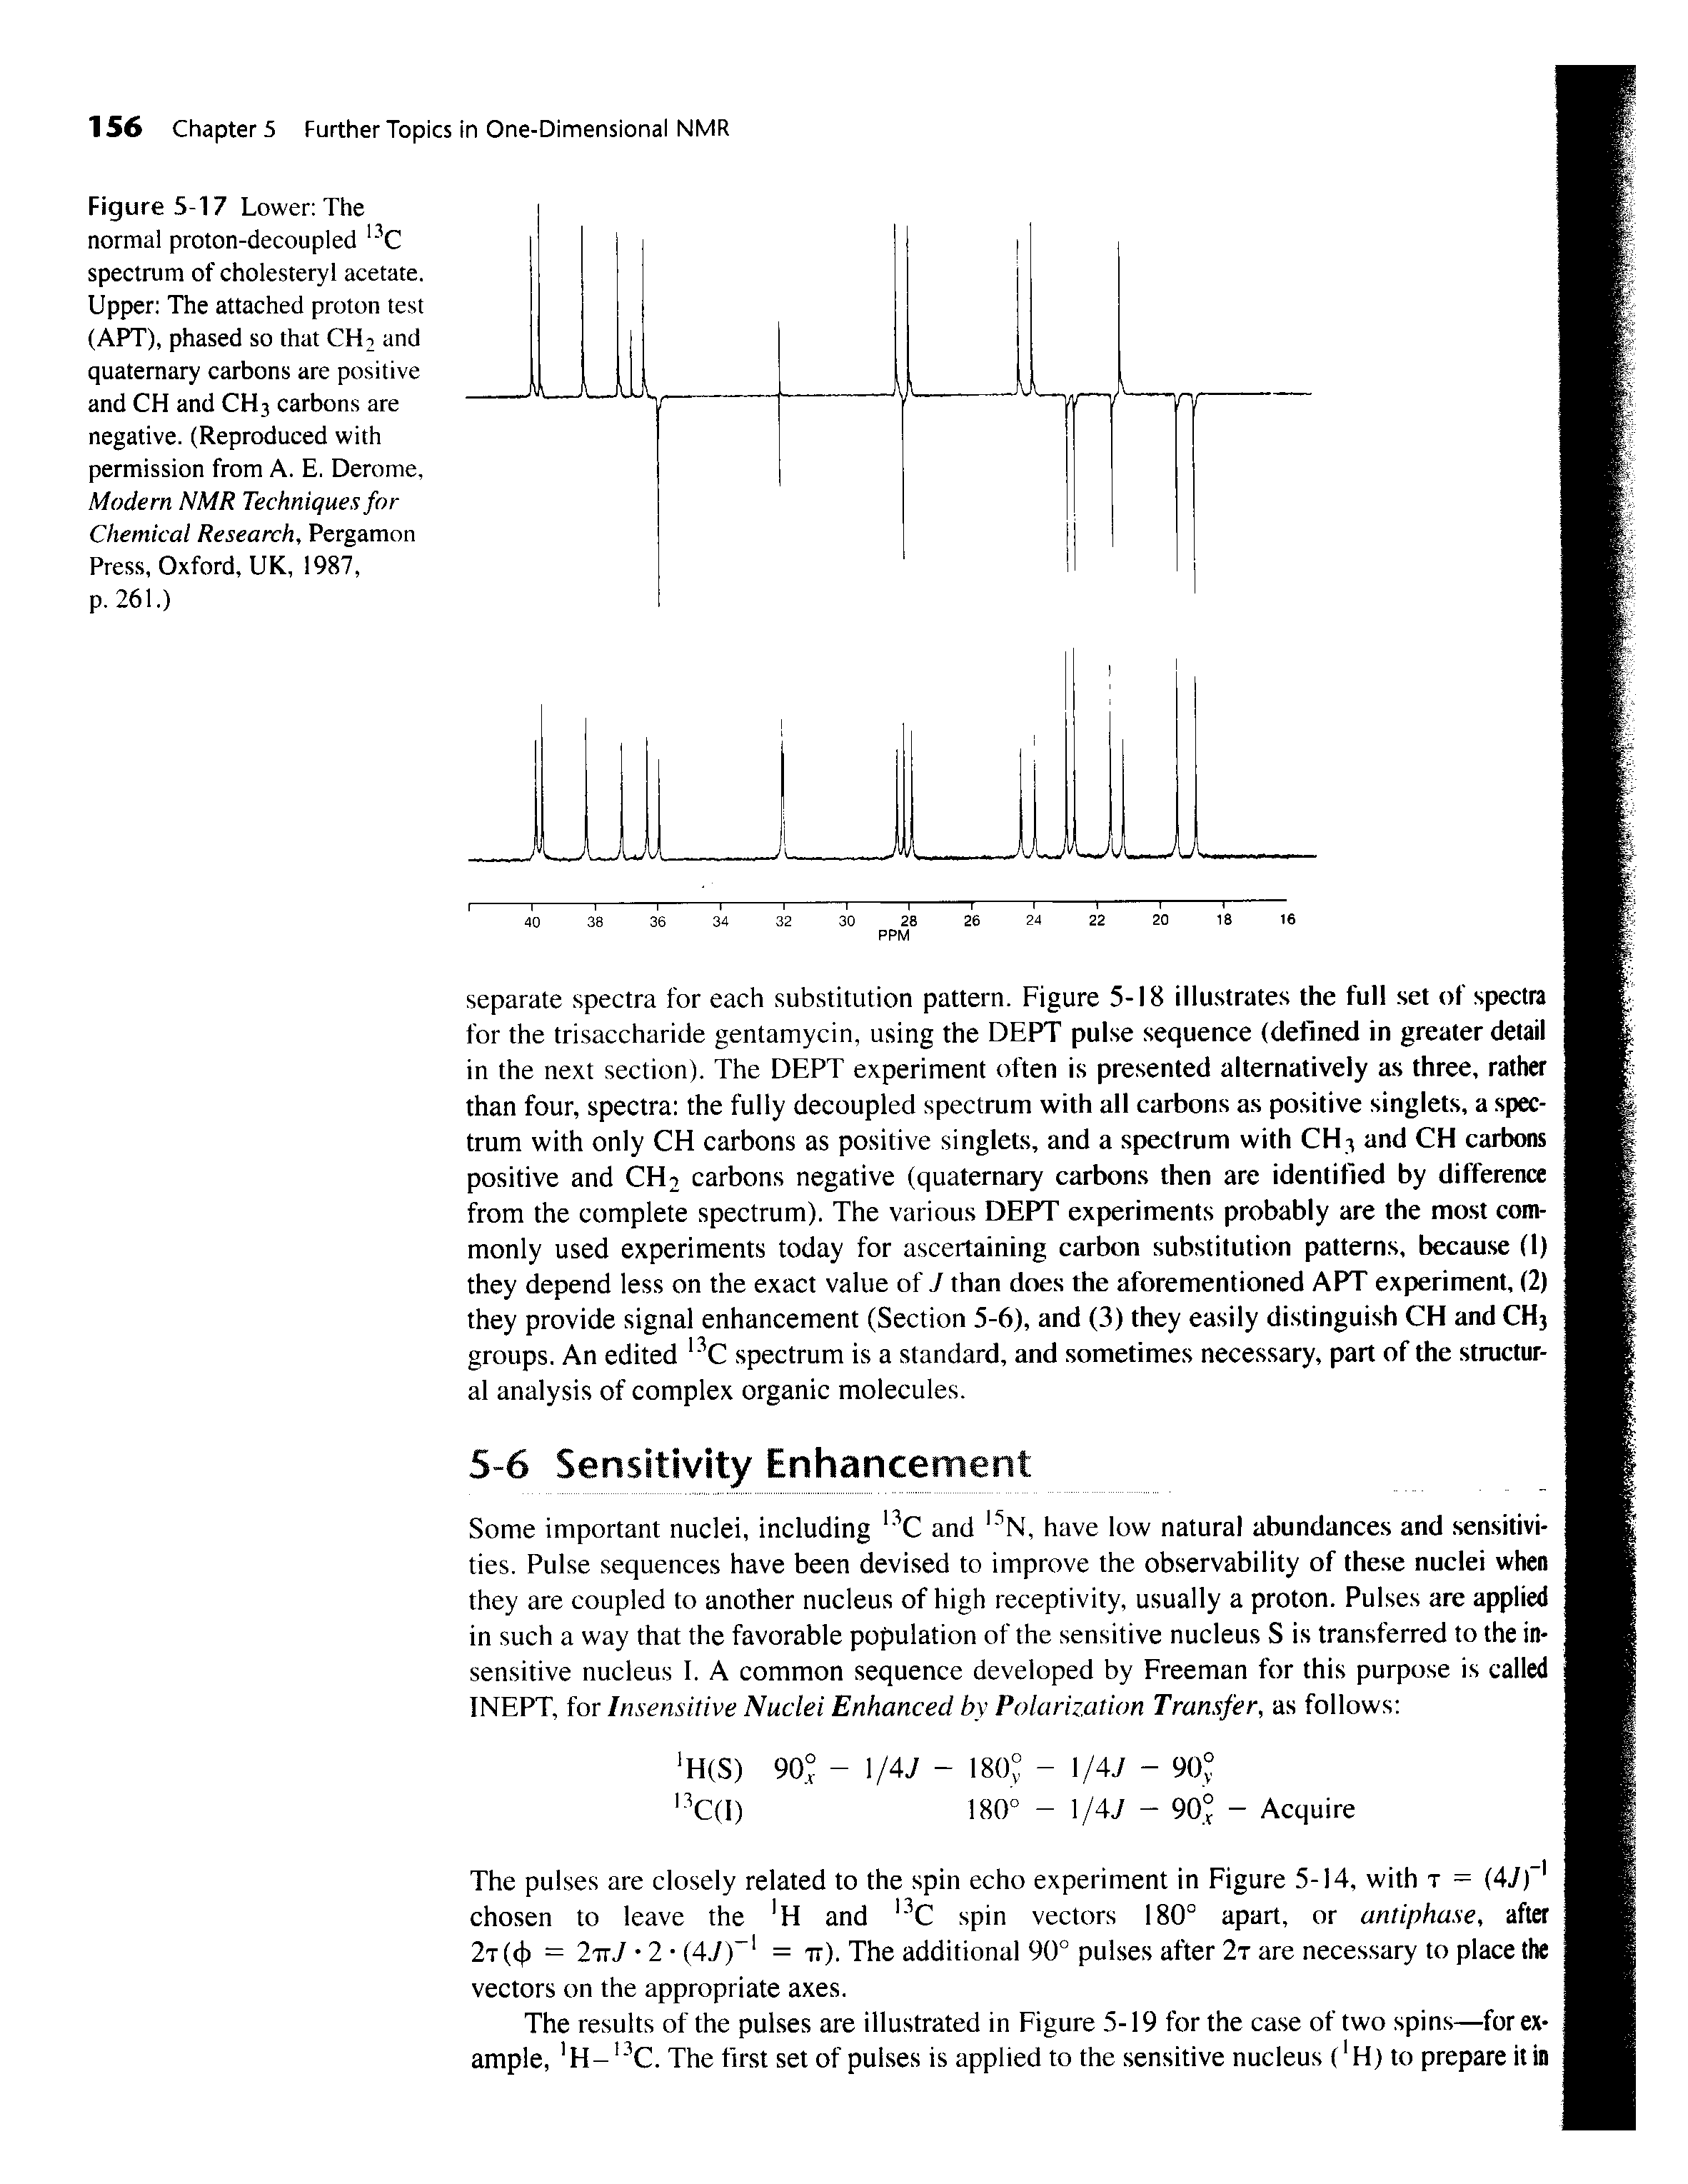 Figure 5-17 Lower The normal proton-decoupled spectrum of cholesteryl acetate. Upper The attached proton test (APT), phased so that CHt and quaternary carbons are positive and CH and CH3 carbons are negative. (Reproduced with permission from A. E. Derome, Modern NMR Techniques for Chemical Research Pergamon Press, Oxford, UK, 1987,...